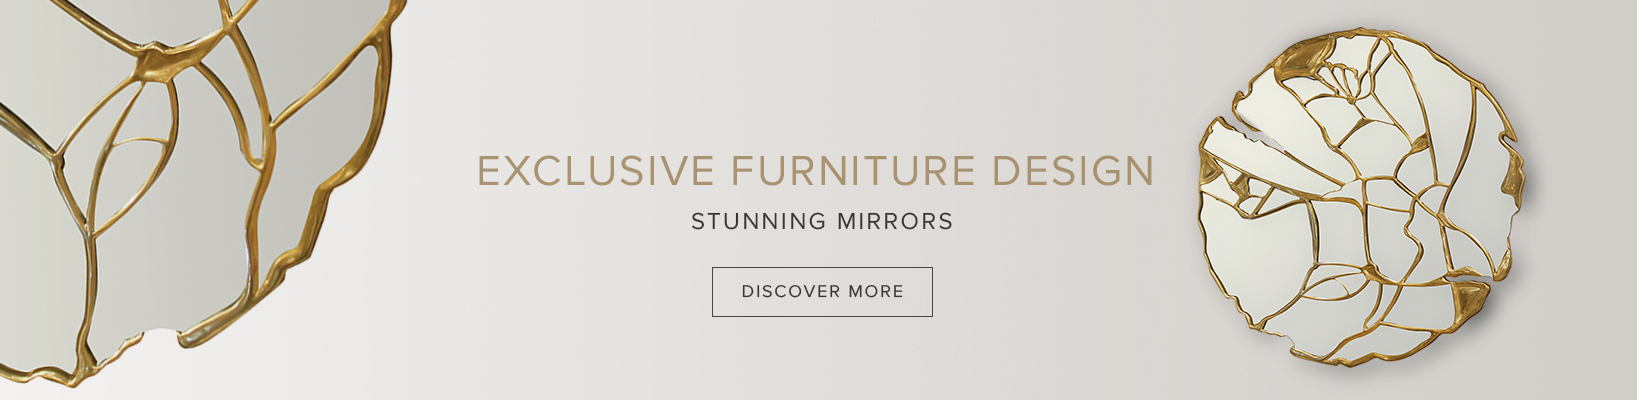 Exclusive Mirrors For Your Home Decor maison et objet Timeless Interiors From Boca do Lobo At Maison Et Objet 2020 banners 20glance